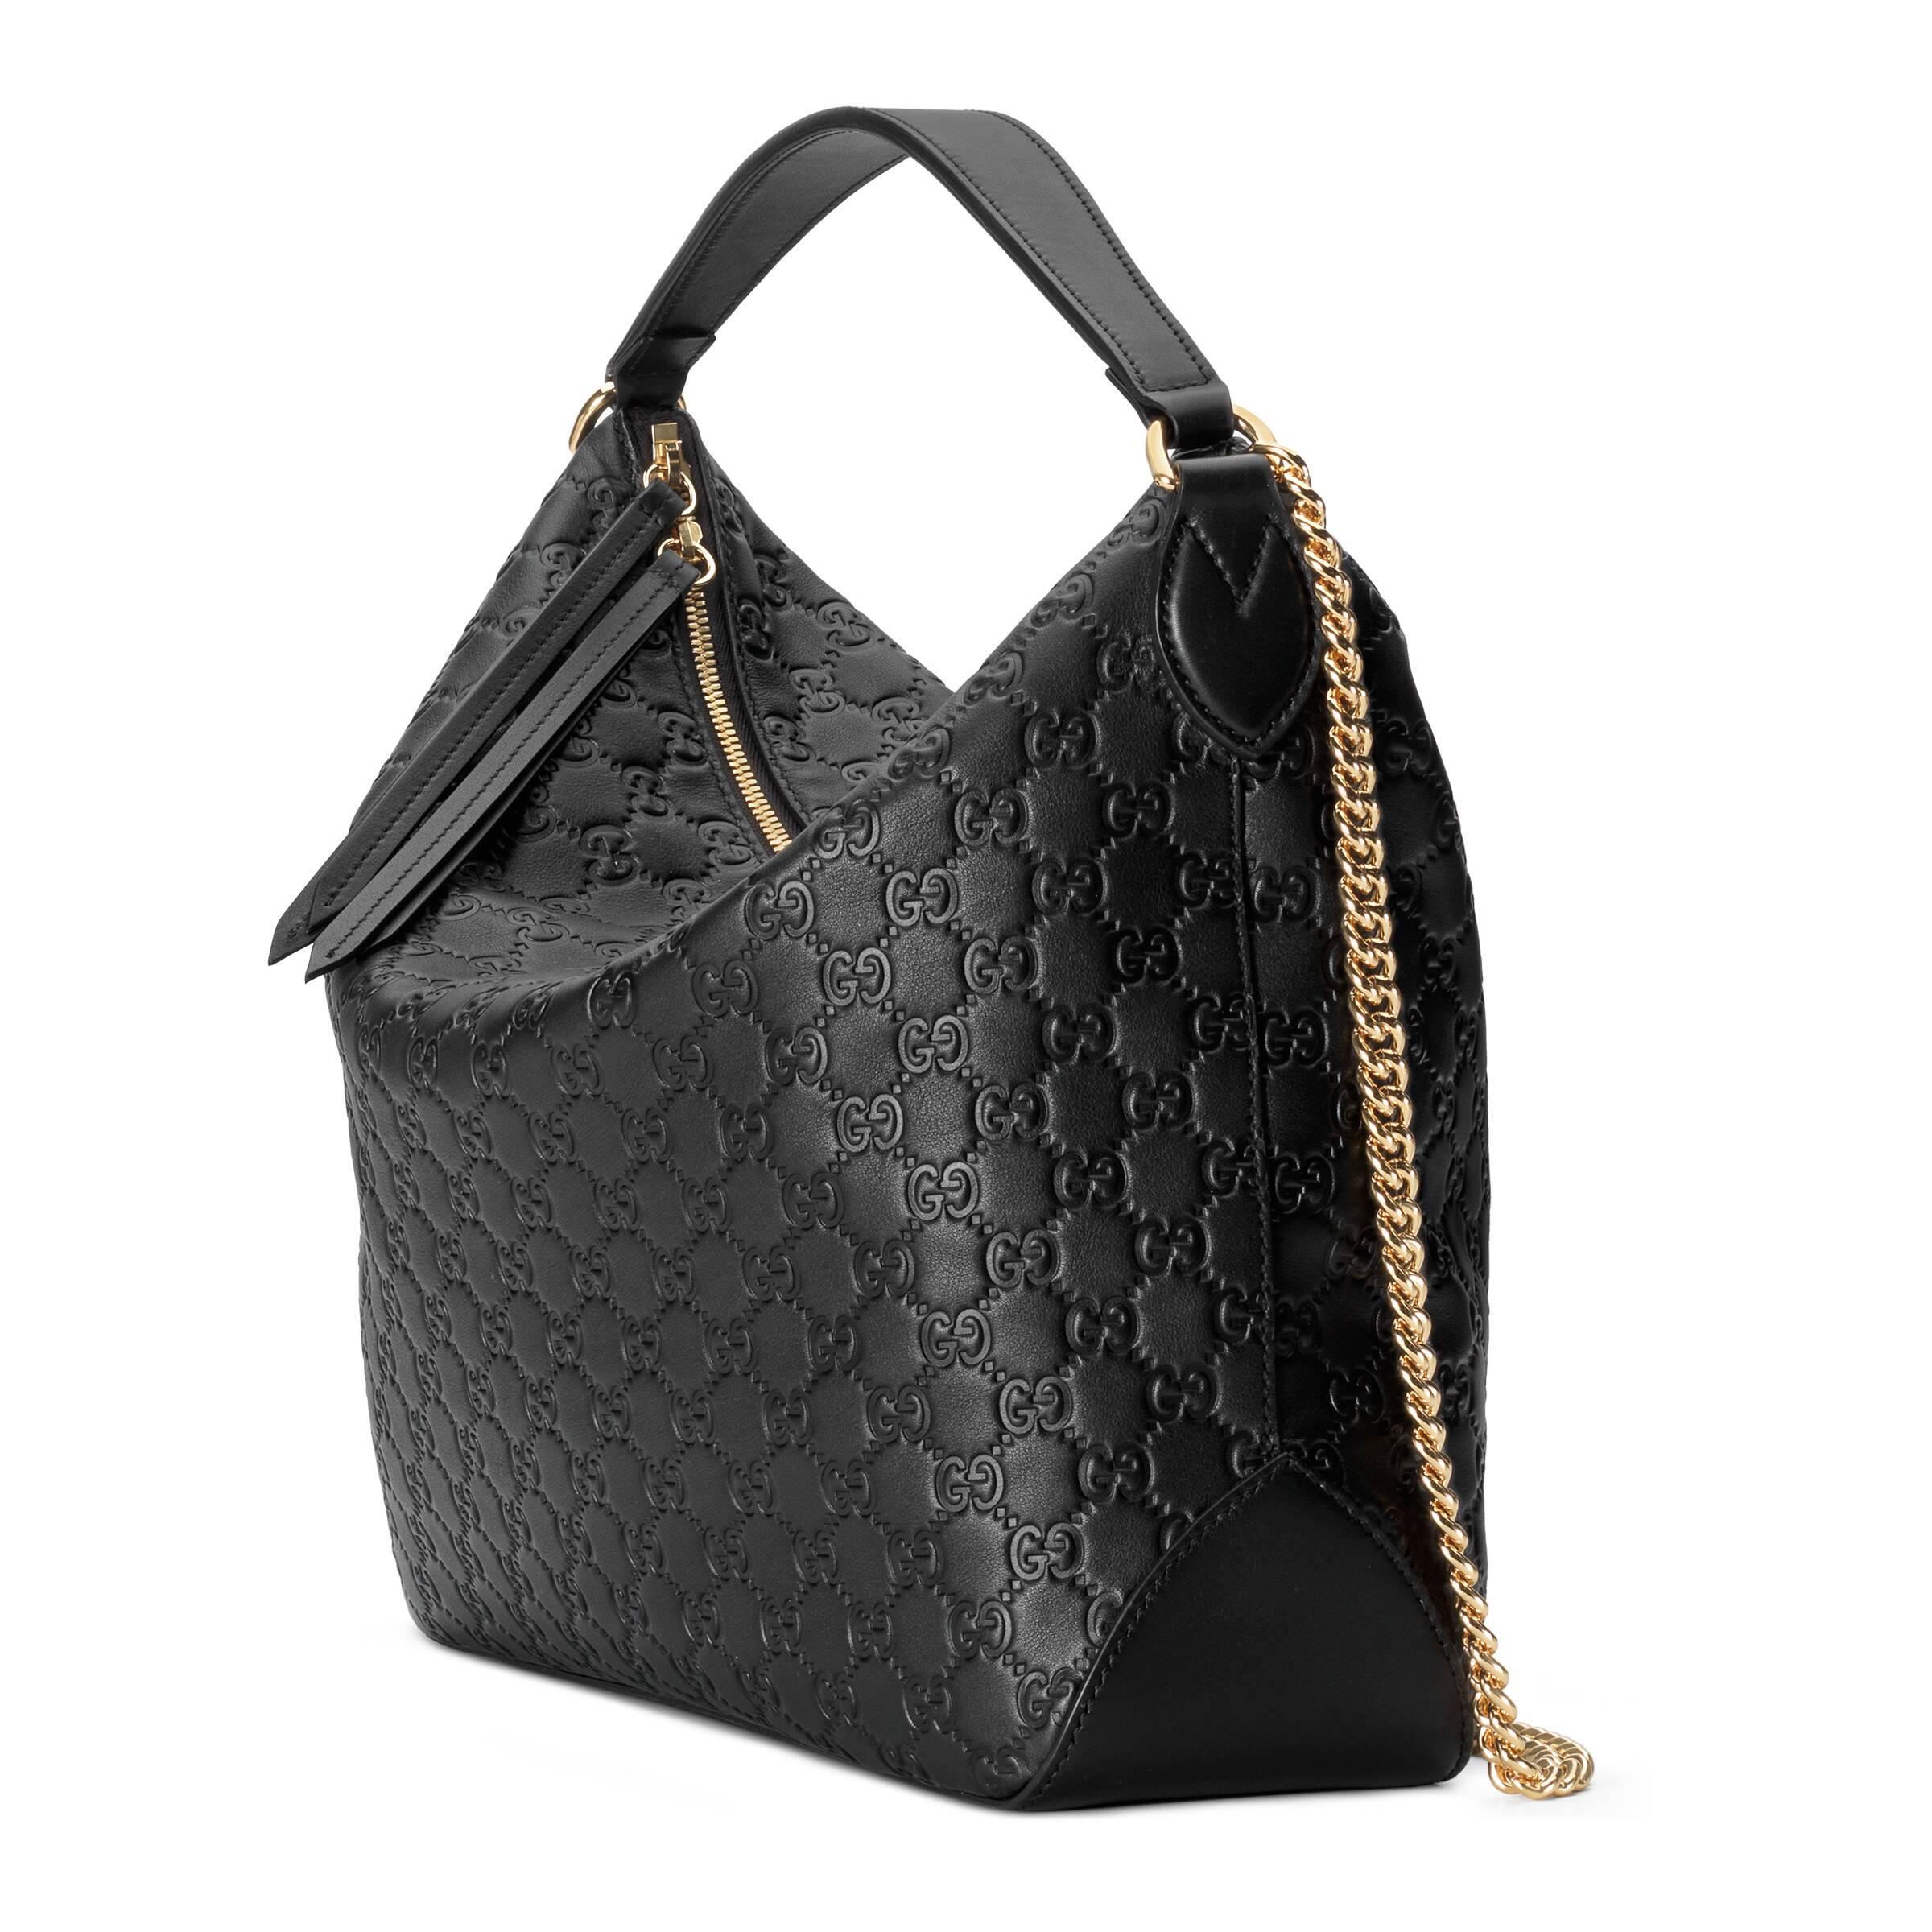 Gucci Signature Large Hobo Bag in Black | Lyst